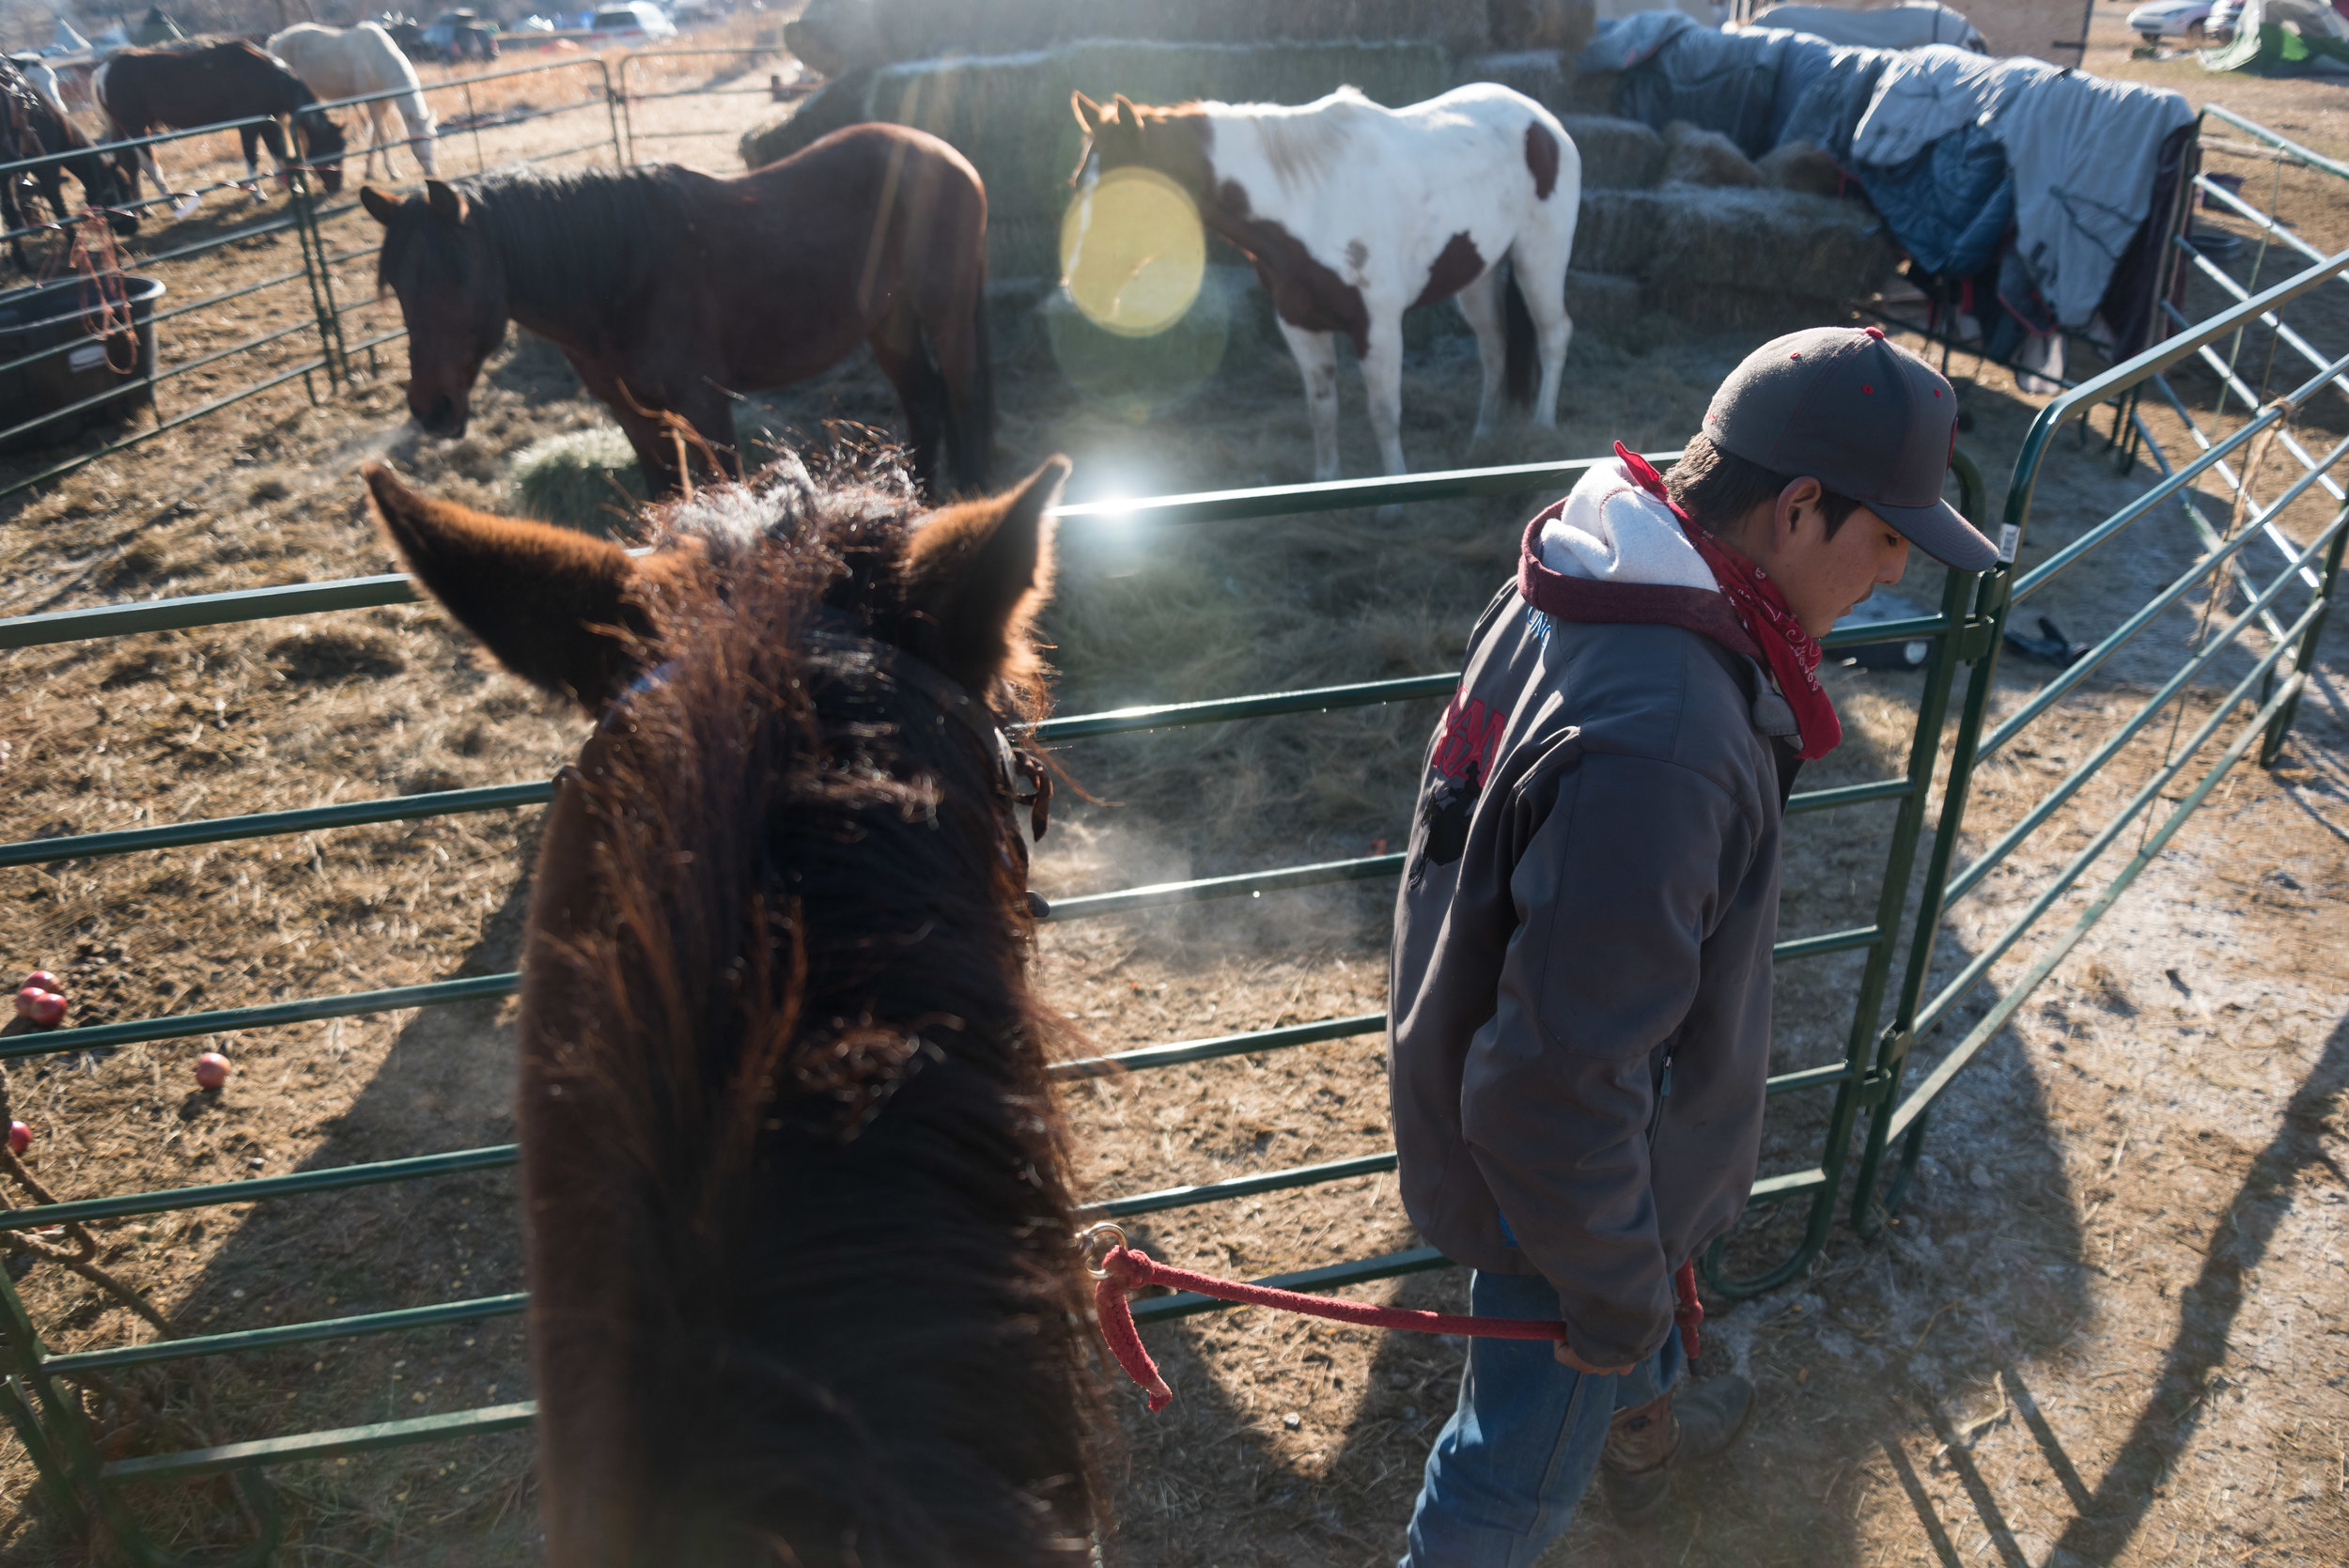  CANNON BALL, North Dakota —Talon Voice, of the Crow Creek Hunkpati, a Sioux tribe from South Dakota, leads Sasha, a four-year-old horse, on Friday, Nov. 25. Voice, 20, travelled with nine horses along with his brother, Mason Redwind, and several oth